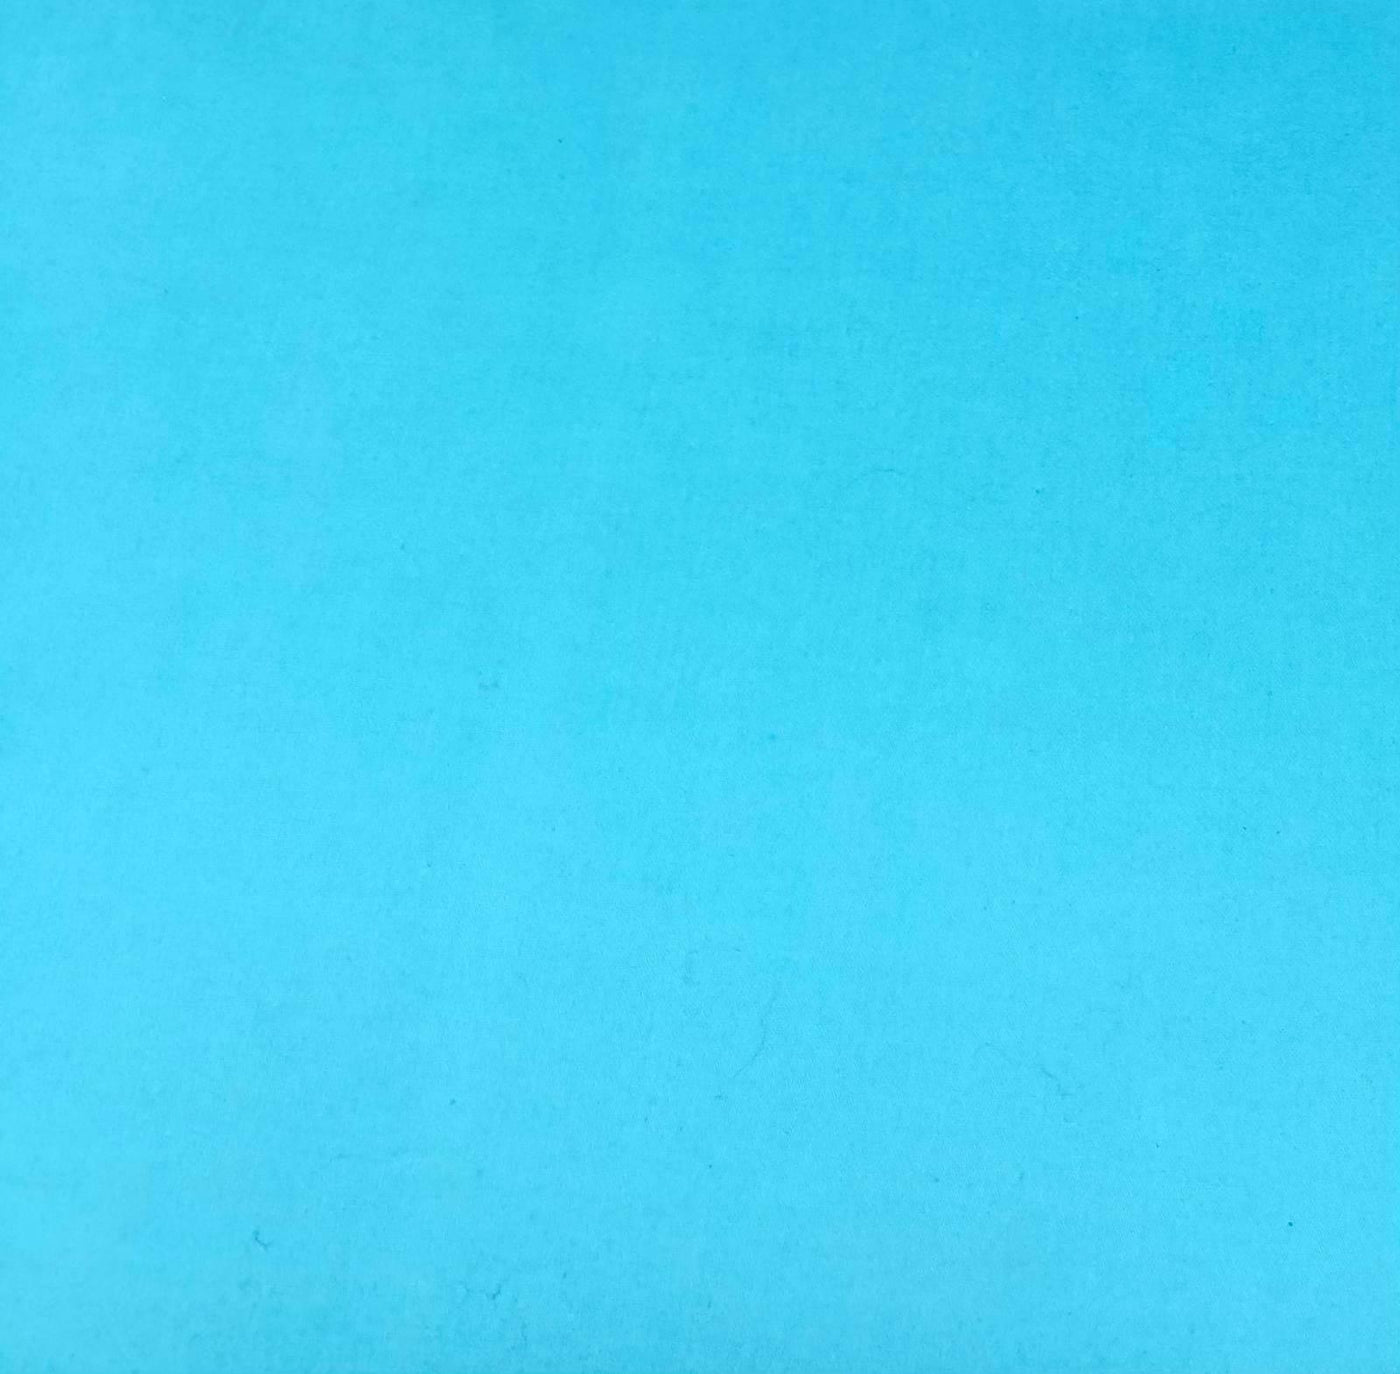 Plain Turquoise Blue 100% Fine Cotton Fabric Material perfect for Face Masks